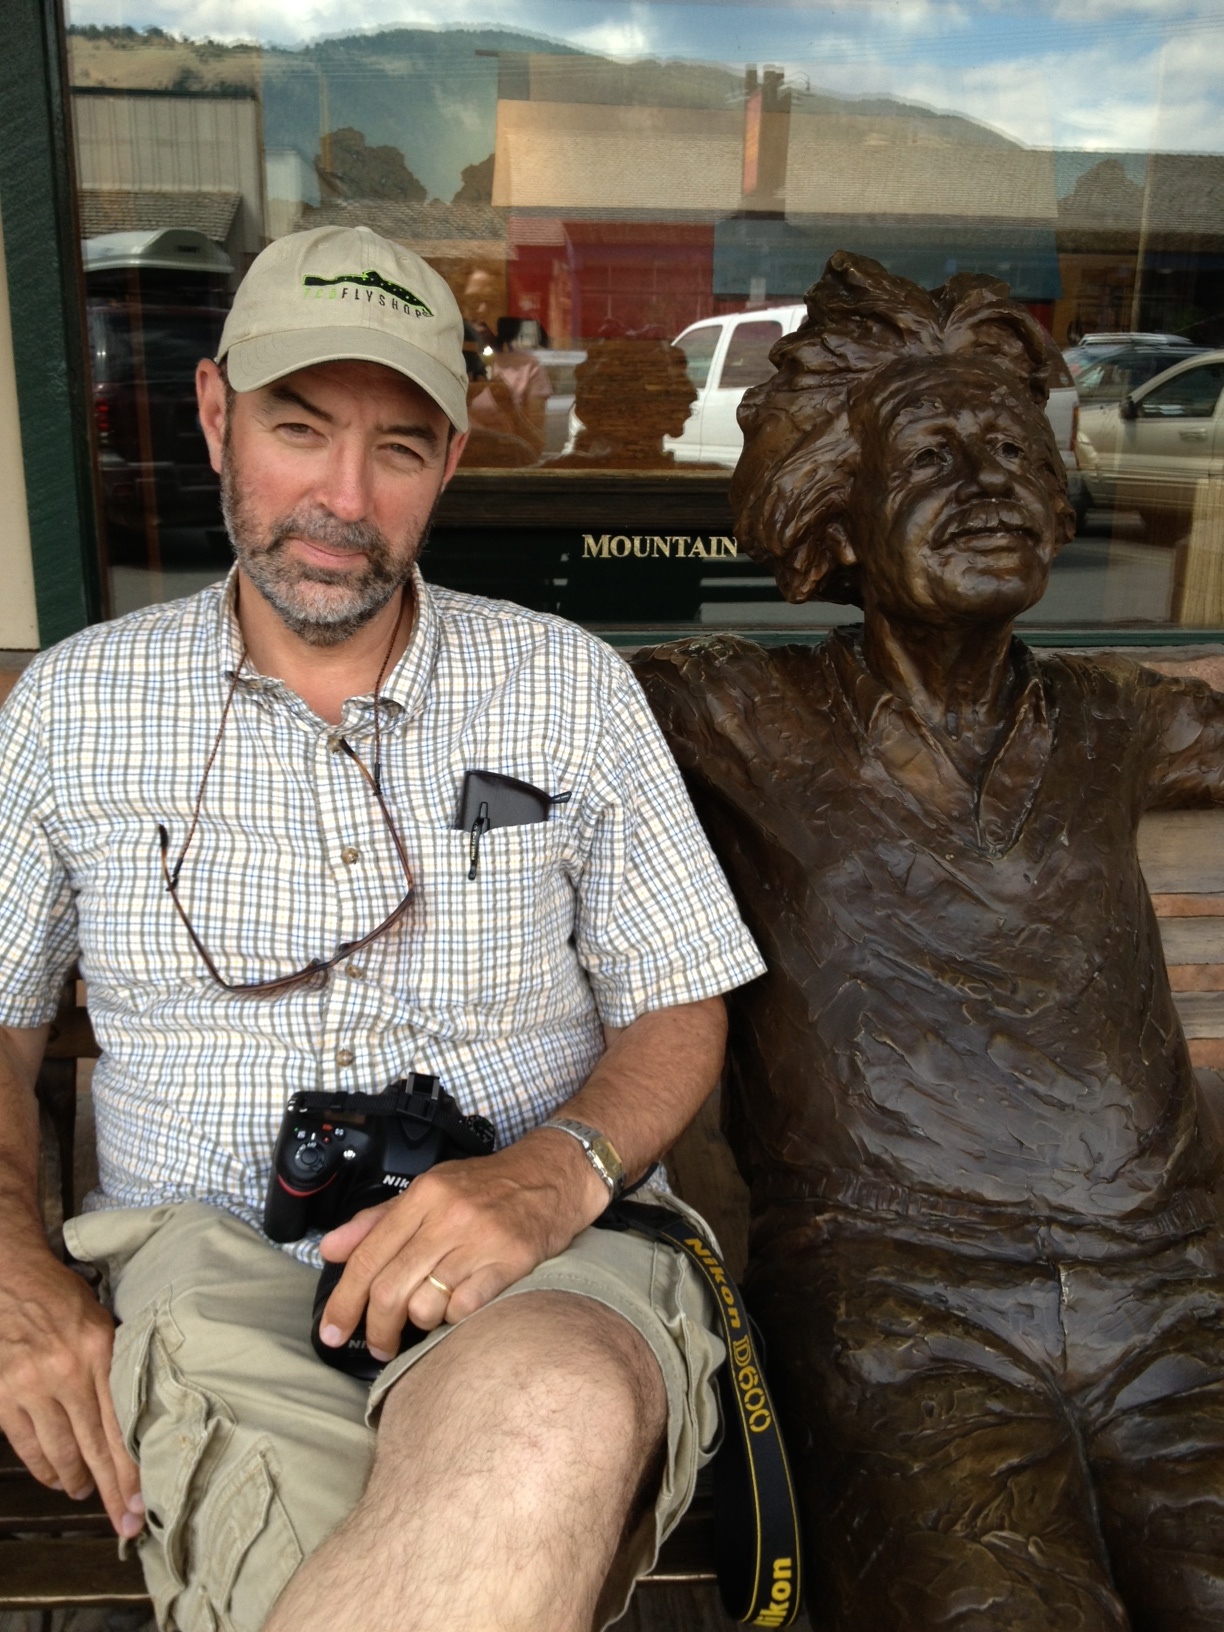 Spence and an old buddy hanging out in Jackson Hole Wyoming...Of all places!